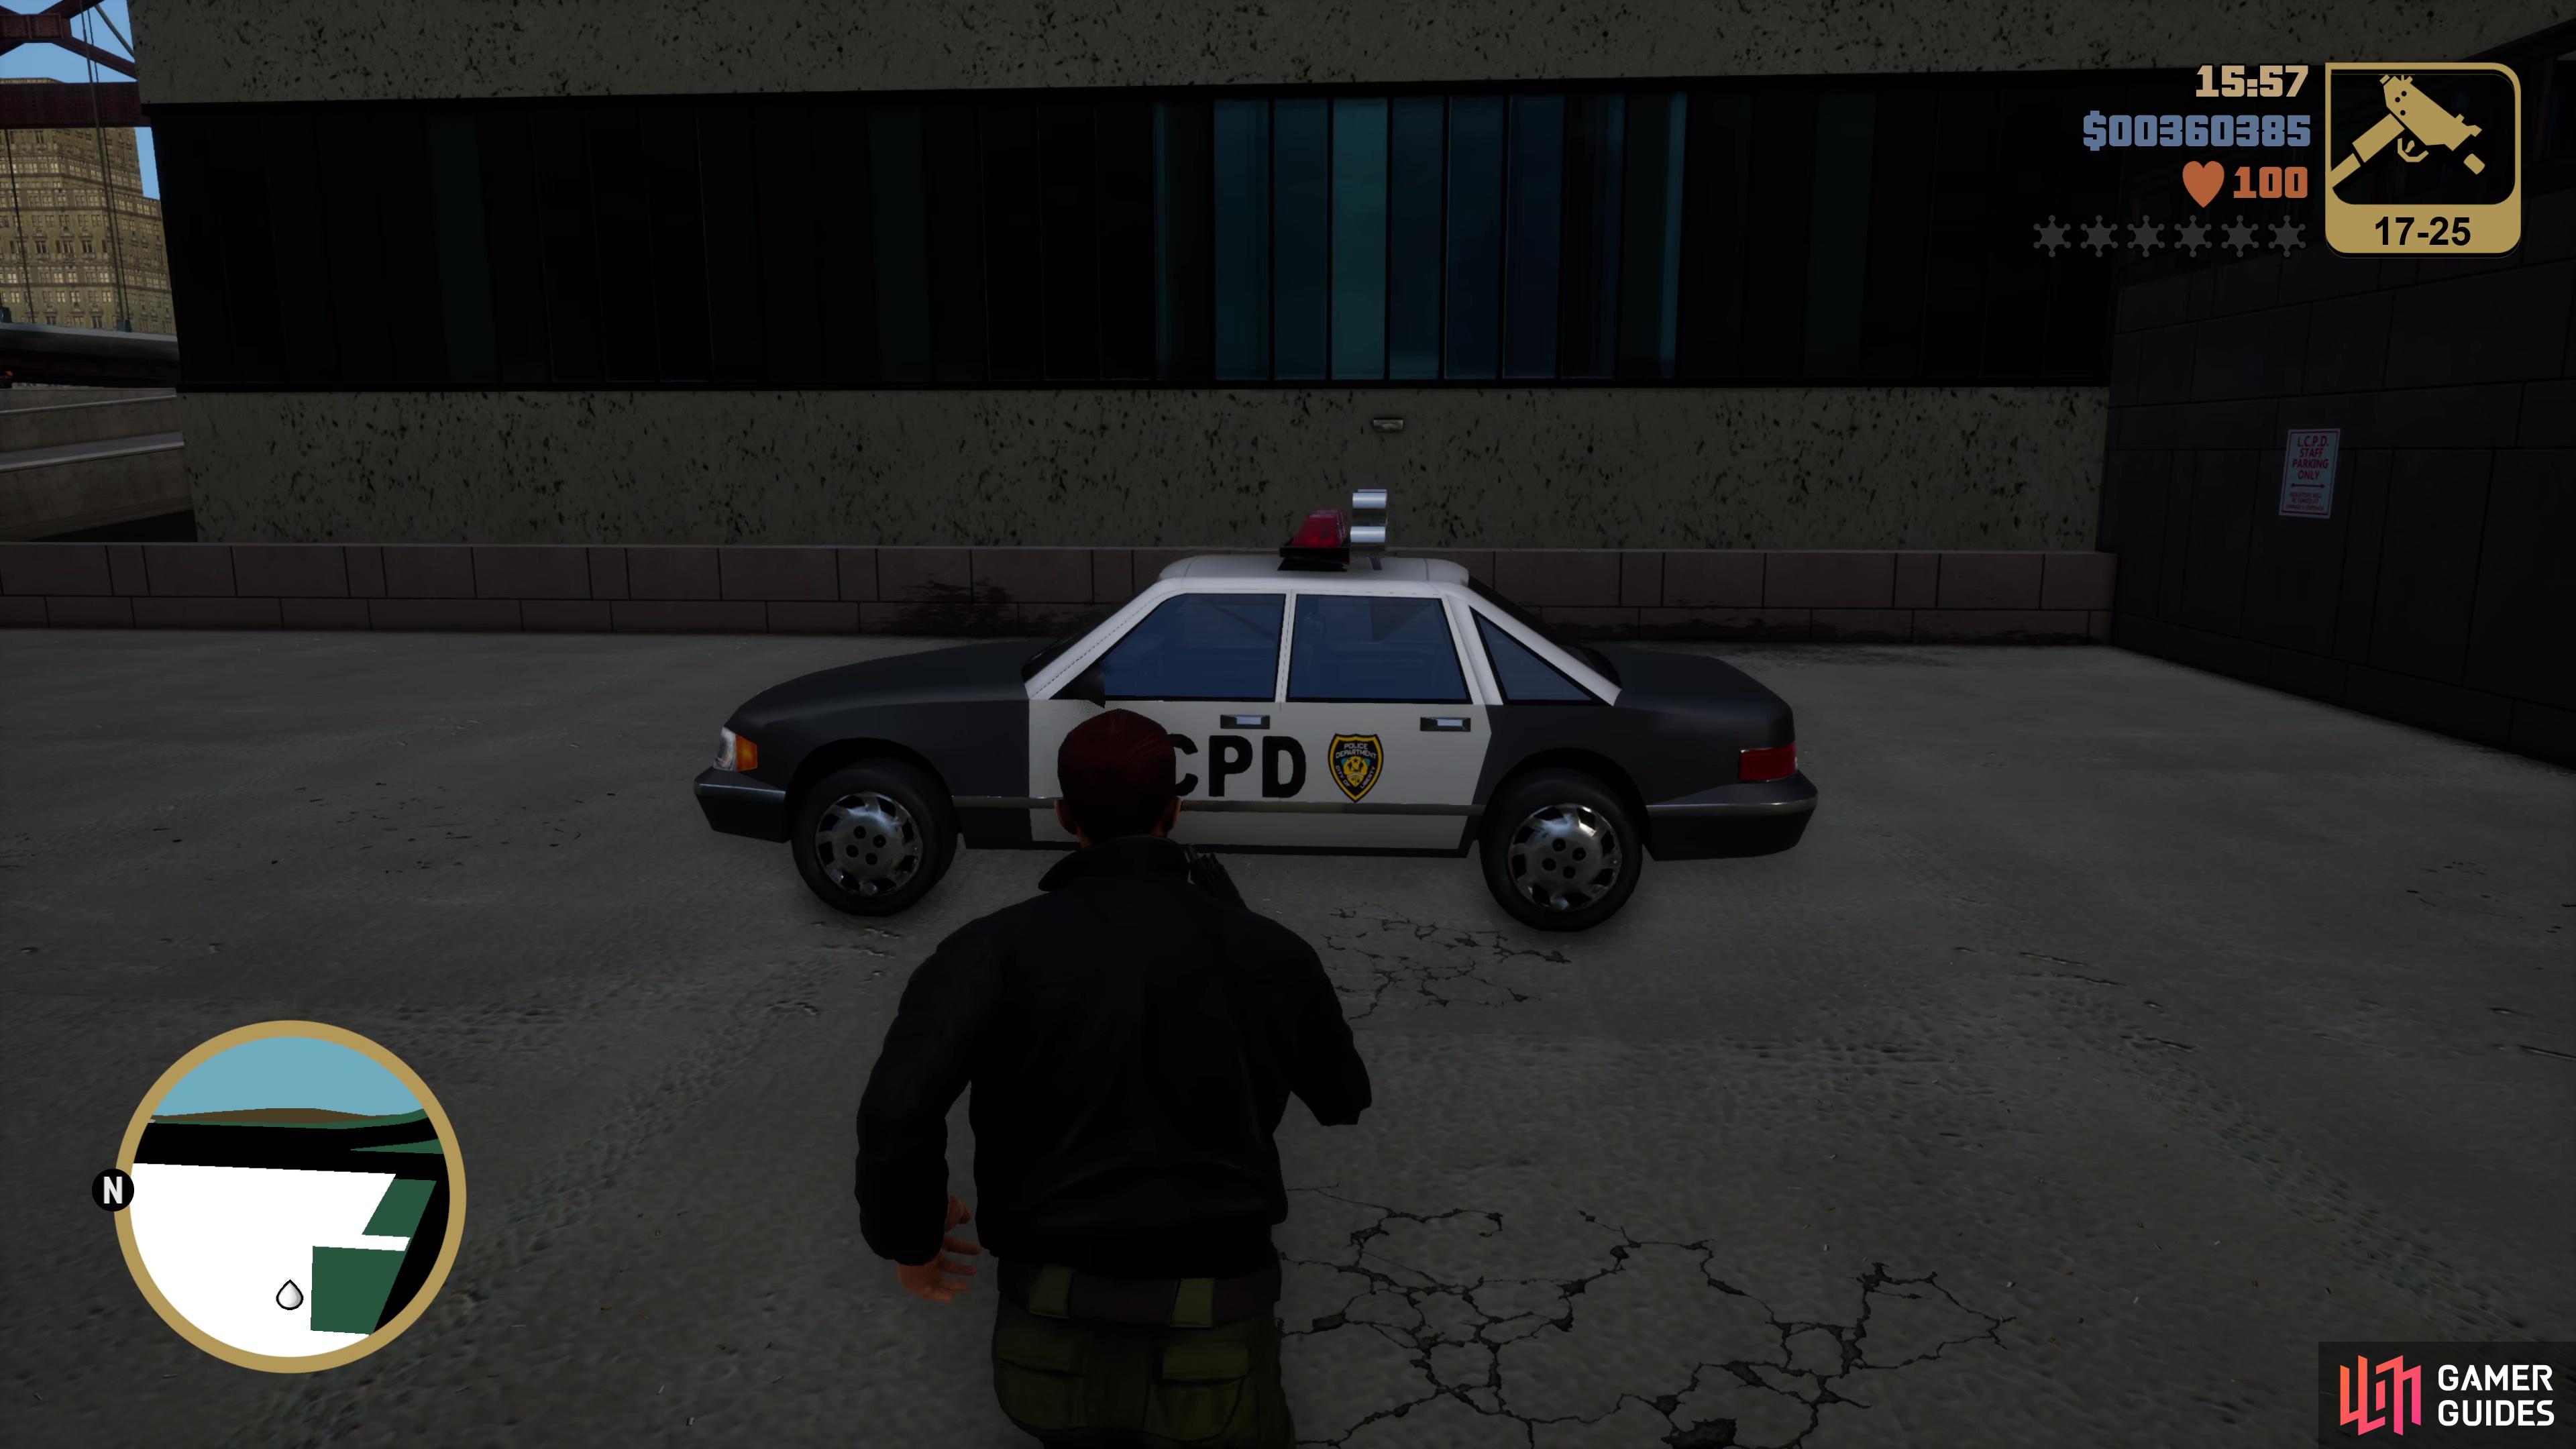 Take the Police Car from the Torrington Police Station